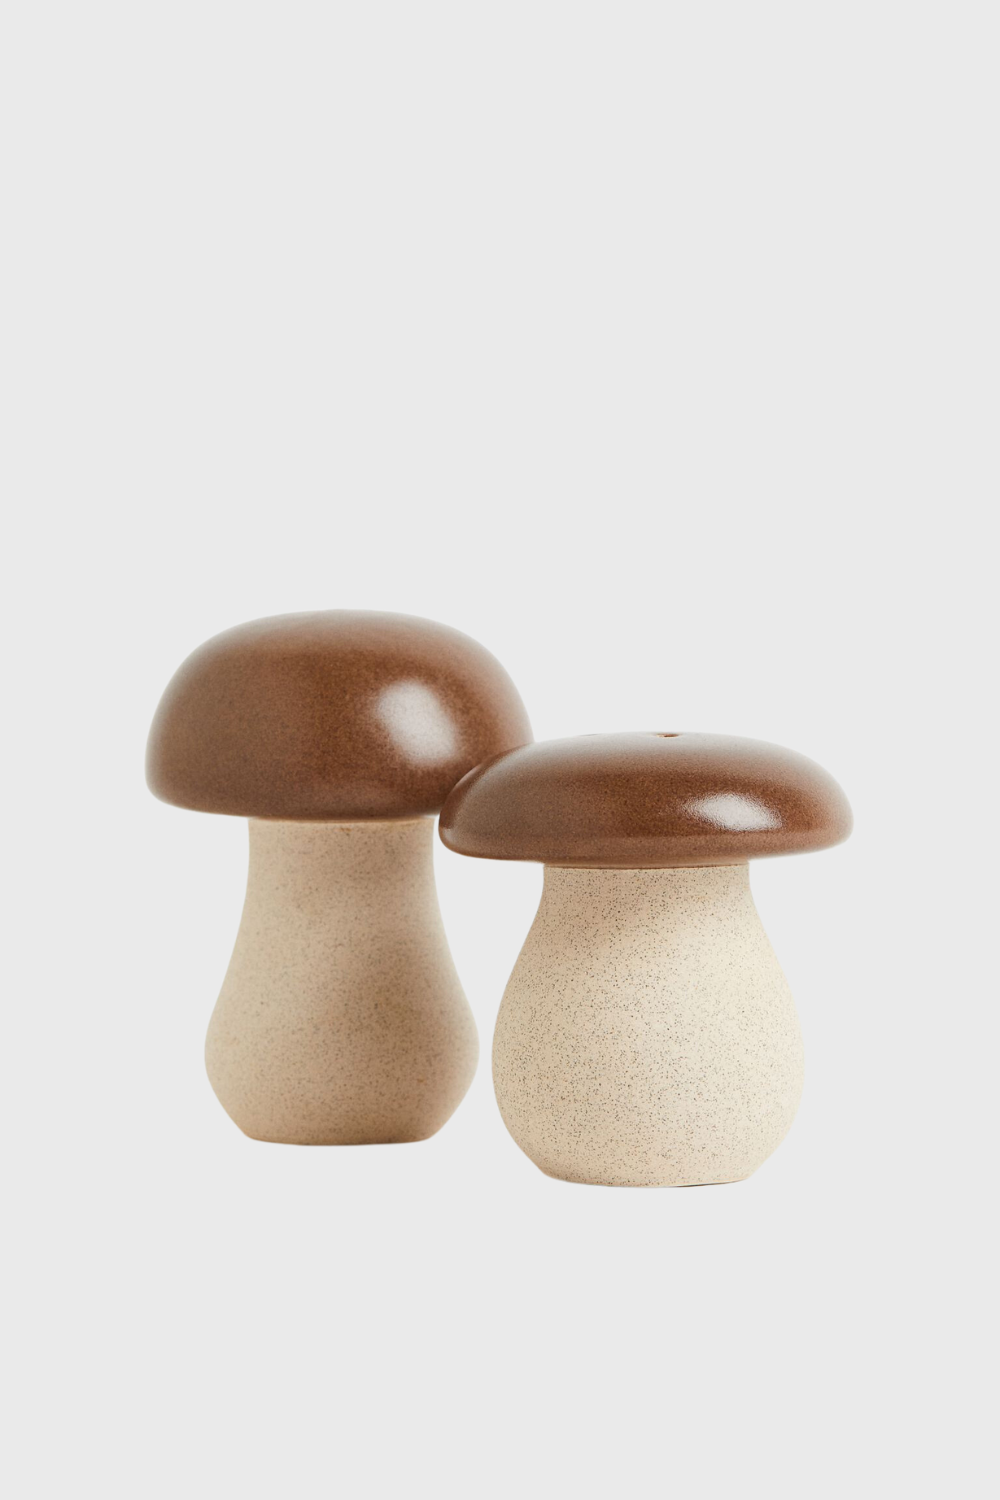 stoneware salt and pepper shakers